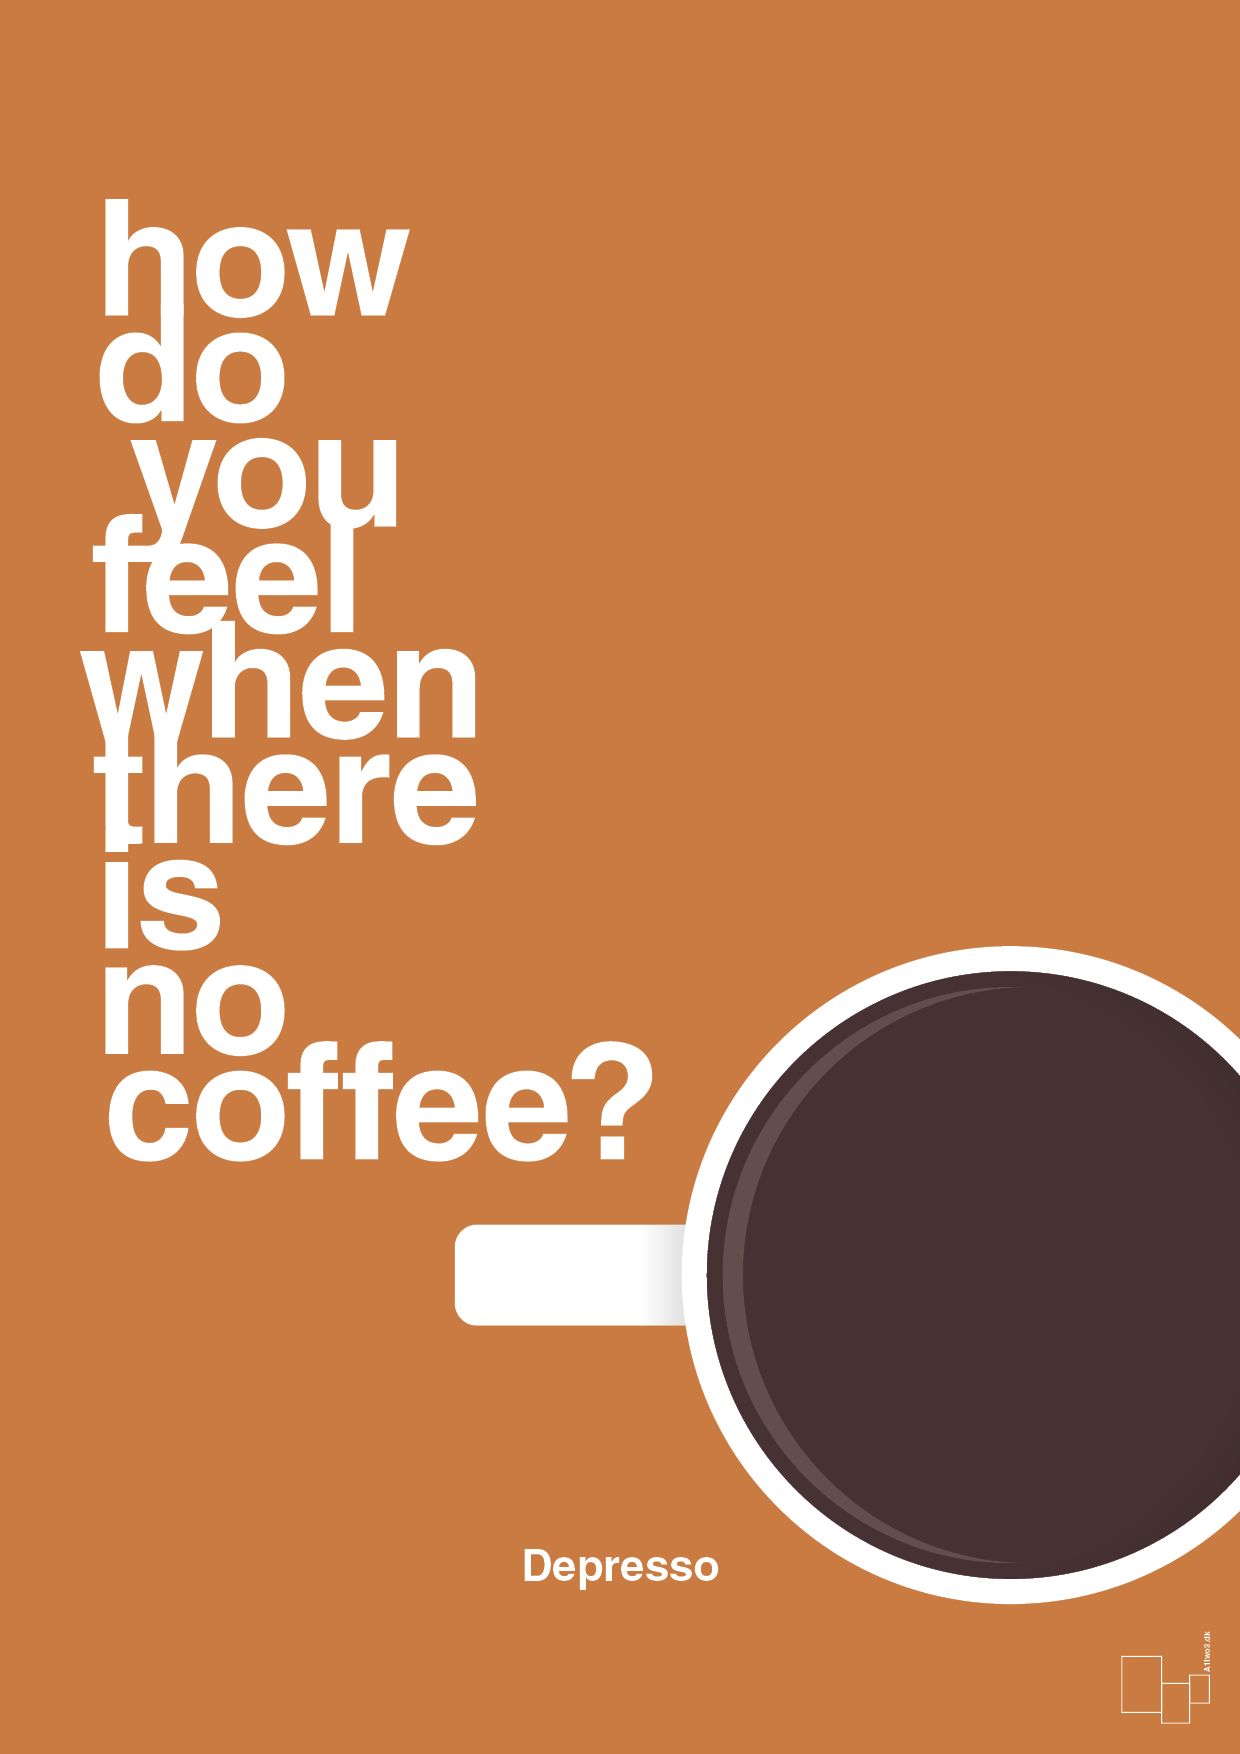 how do you feel when there is no coffee? depresso - Plakat med Mad & Drikke i Rumba Orange